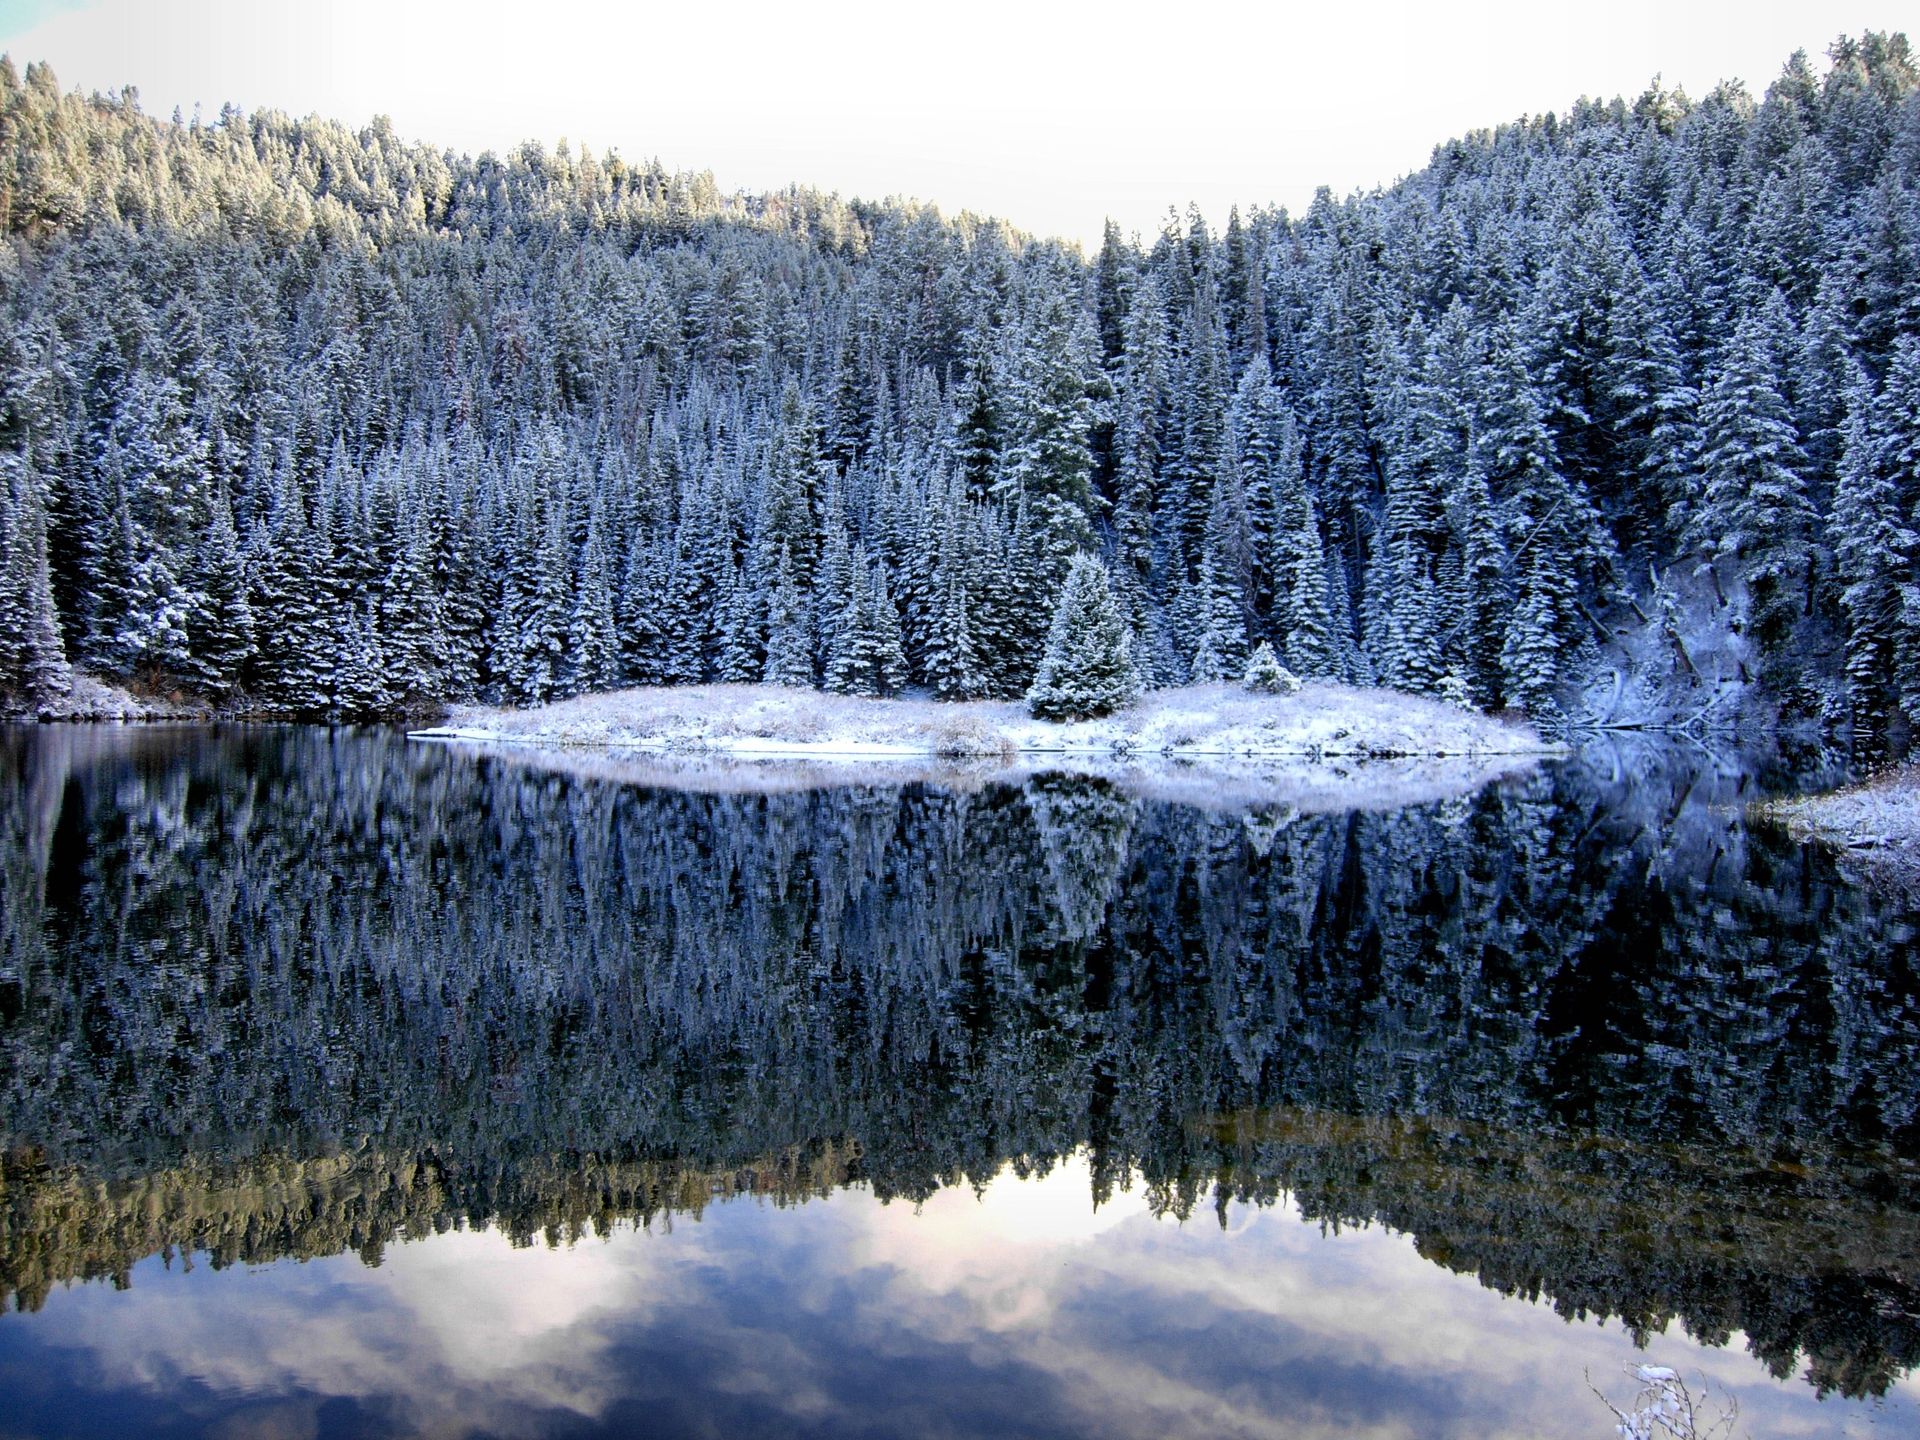 Snow-covered trees are reflected in a pond.